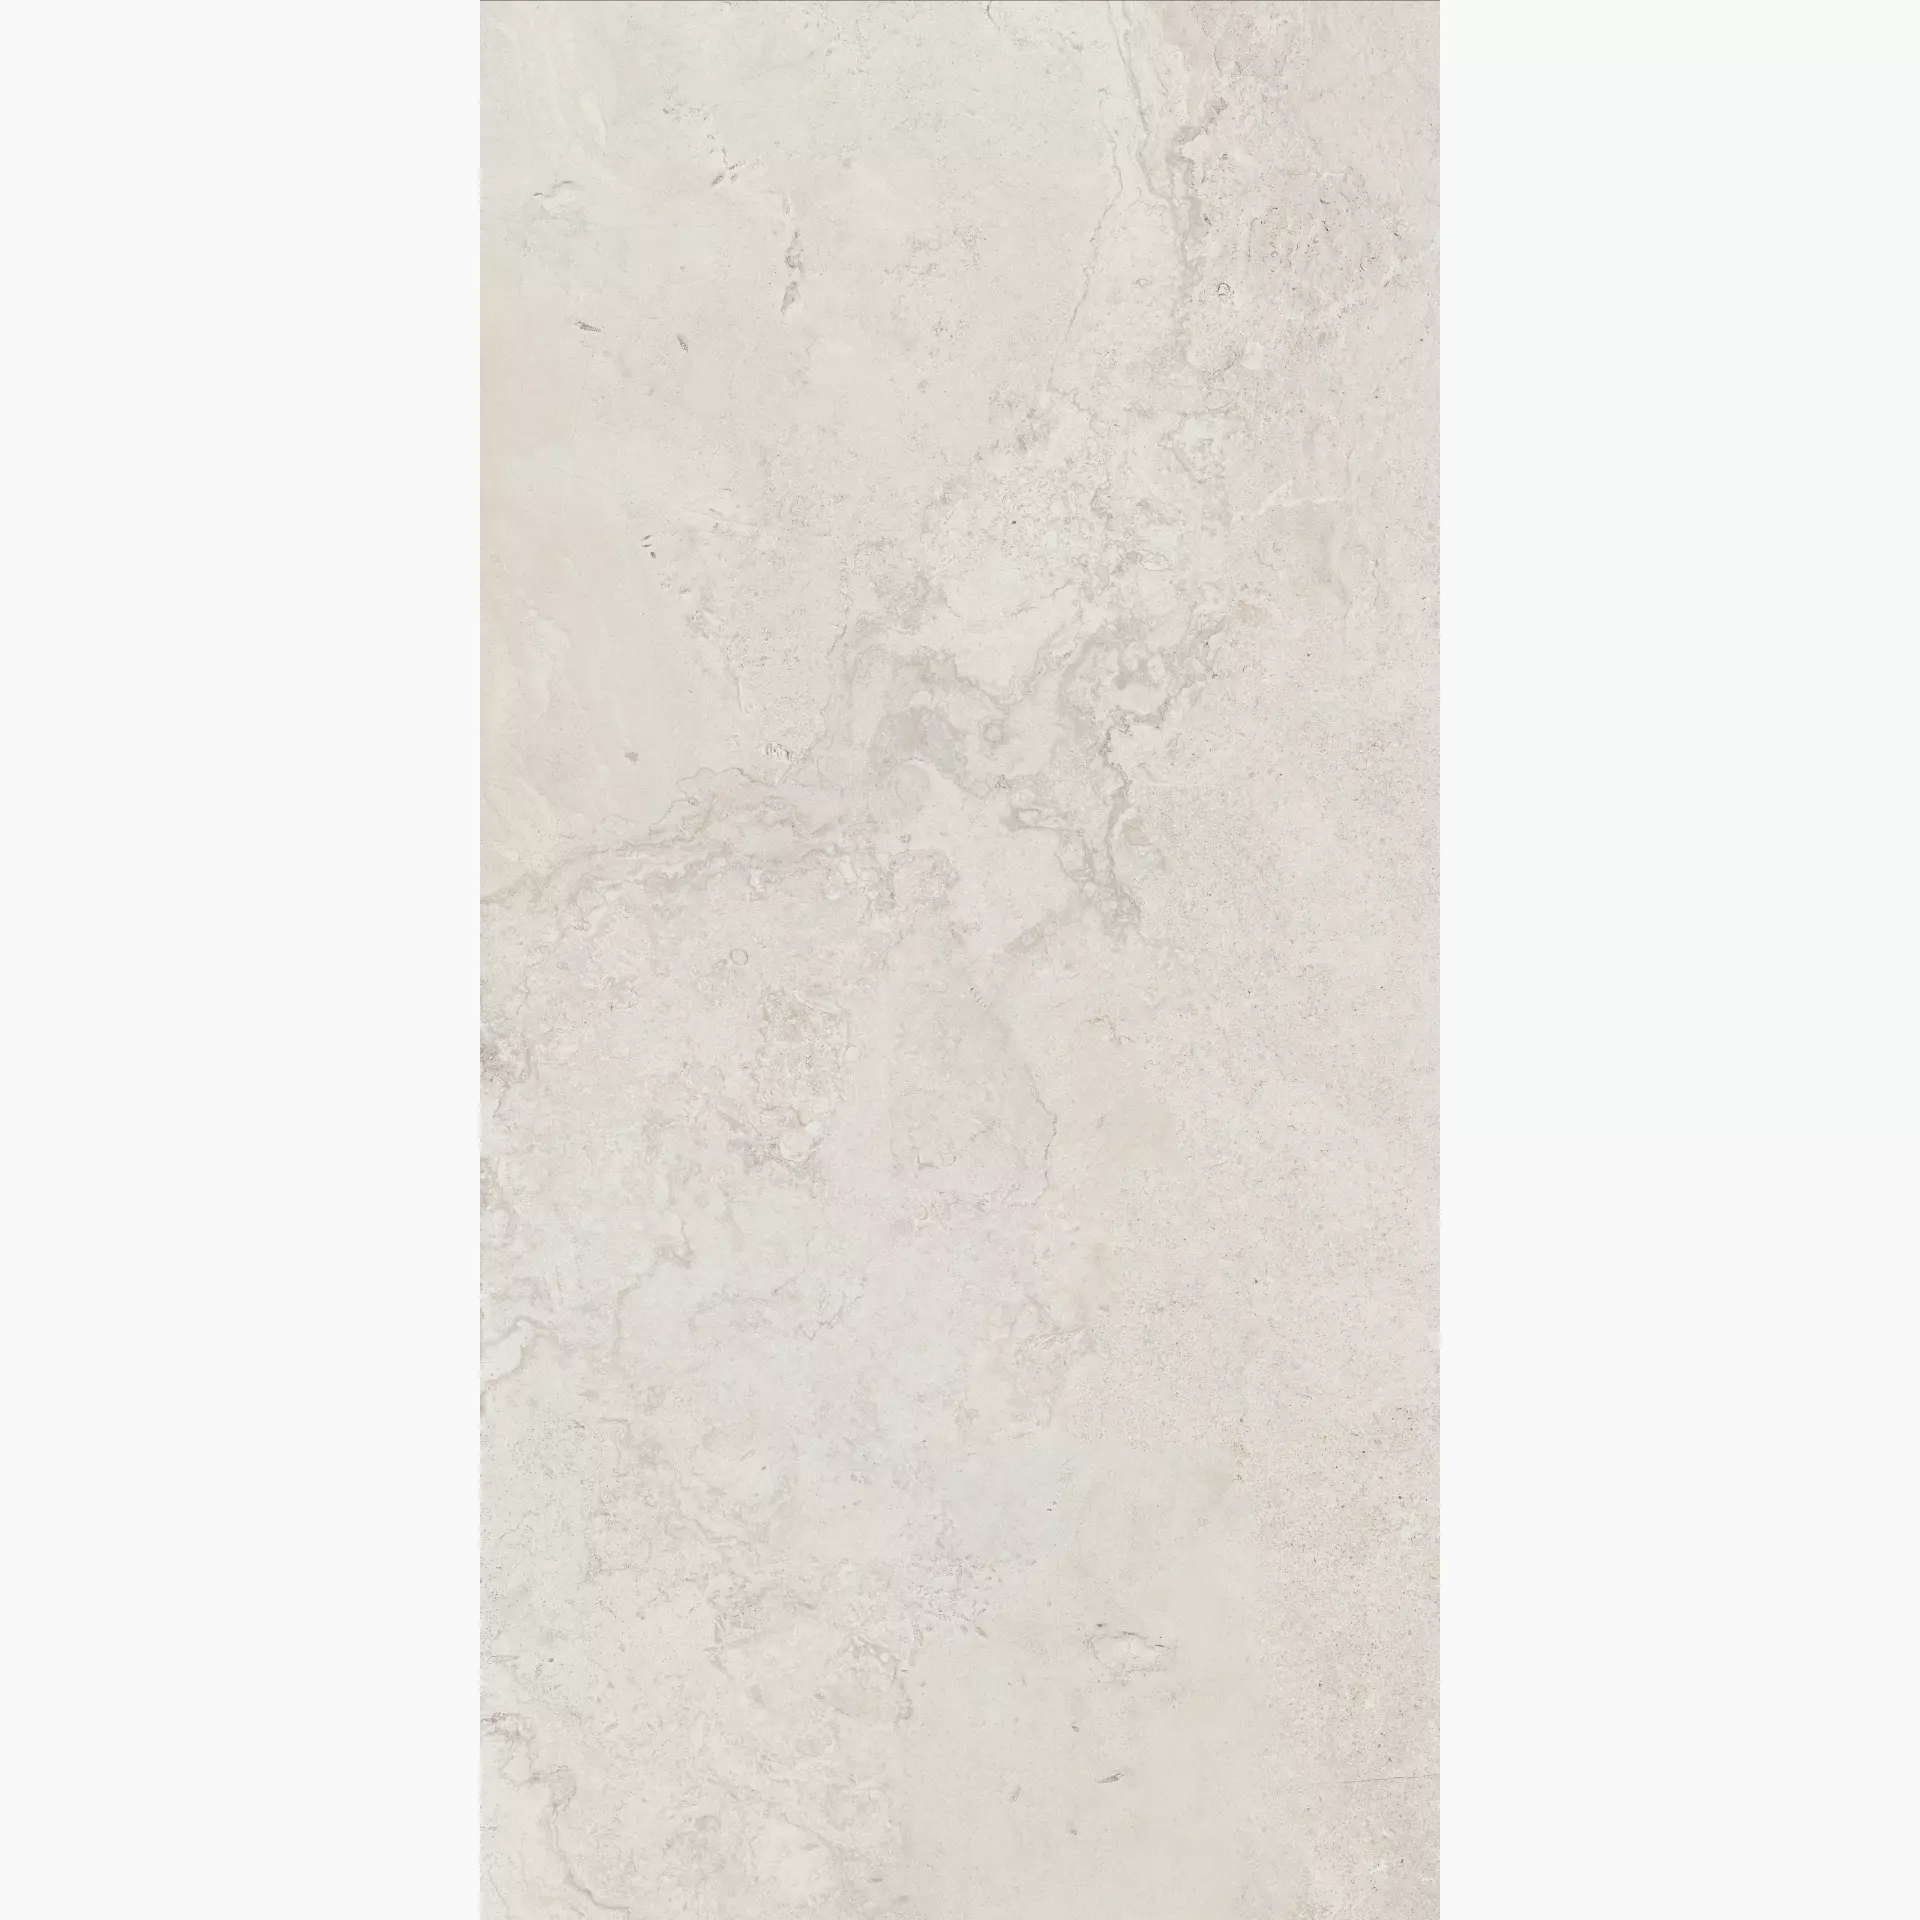 ABK Alpes Wide Ivory Naturale PF60000203 80x160cm rectified 8,5mm